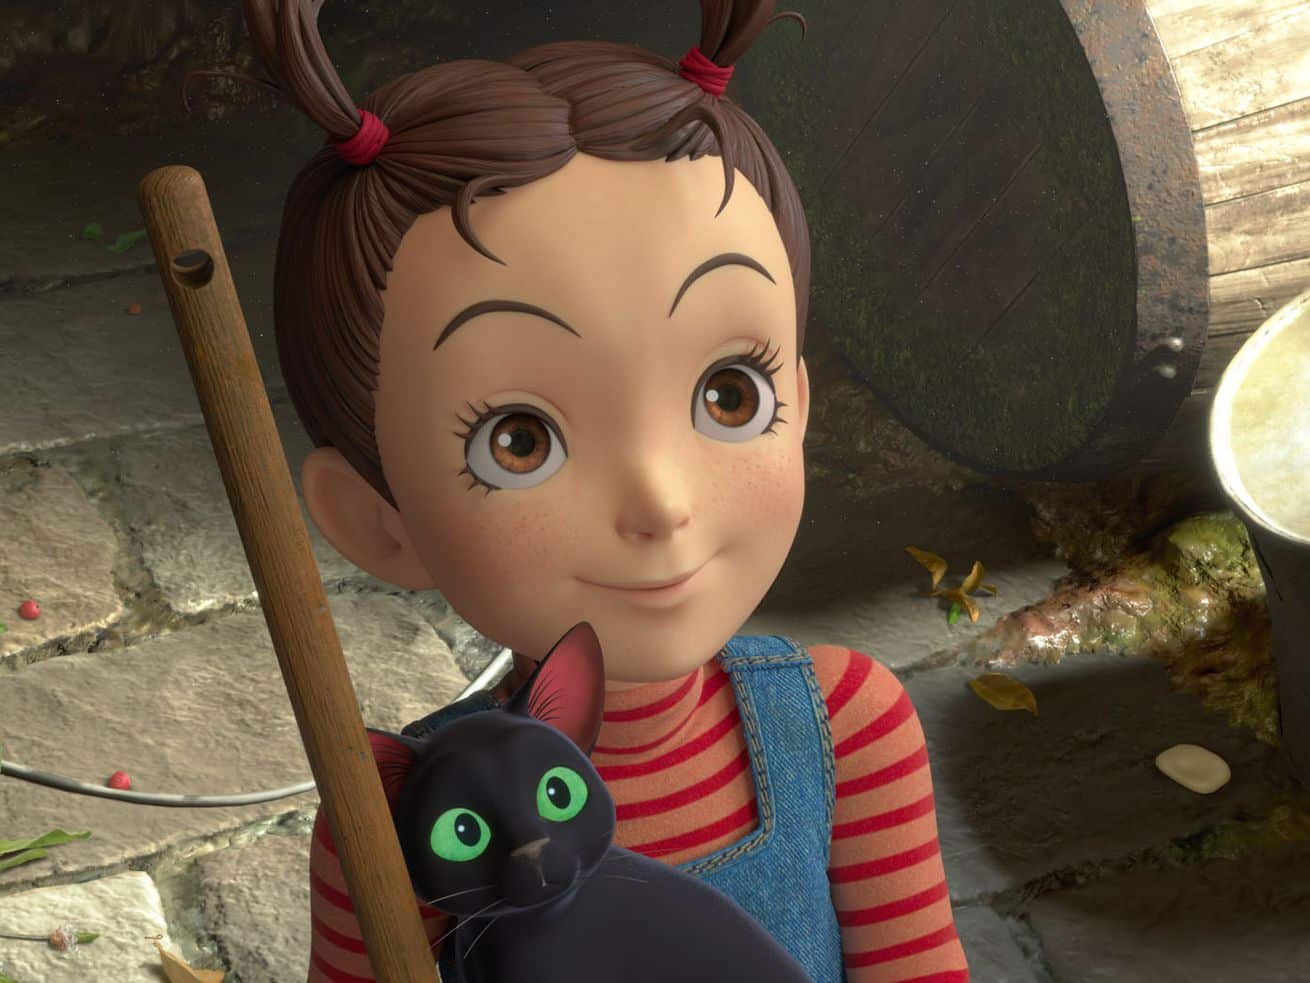 Earwig and the Witch is Studio Ghibli’s first 3D animated film. It’s disappointingly subpar.